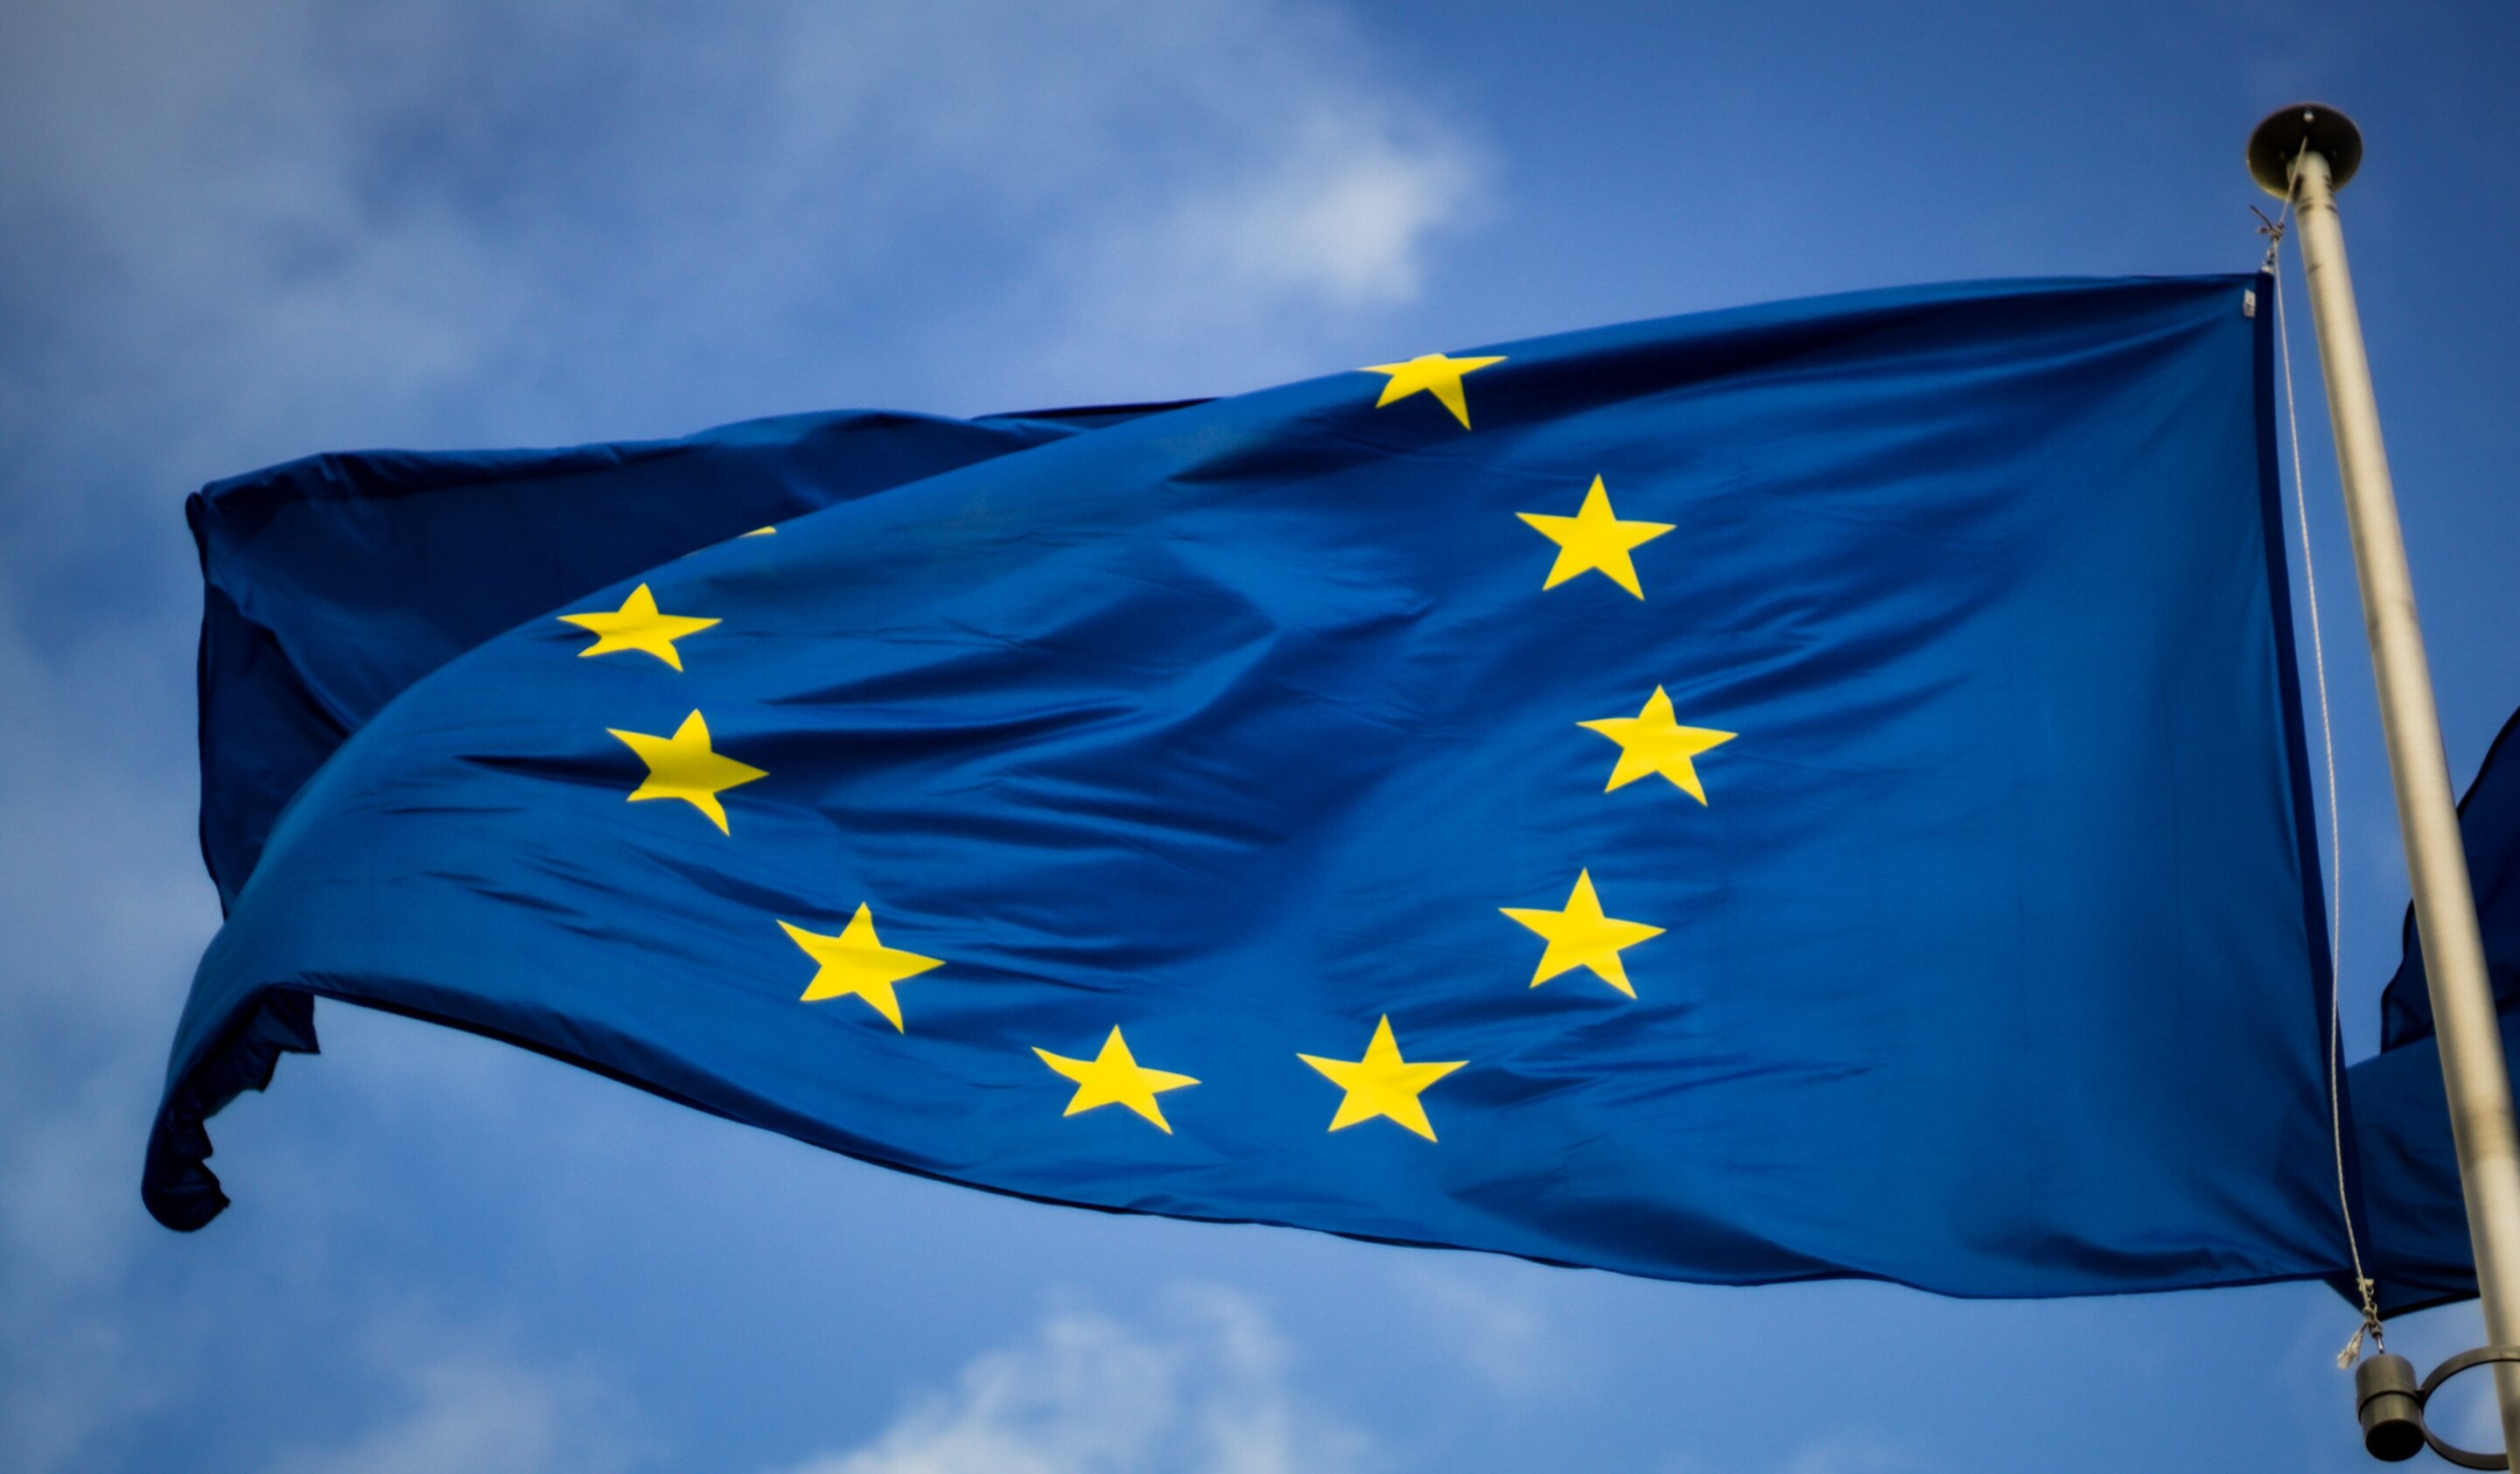 The EU flag, blue with yellow stars, is seen blowing in the wind on a sunny day with blue sky in the background.